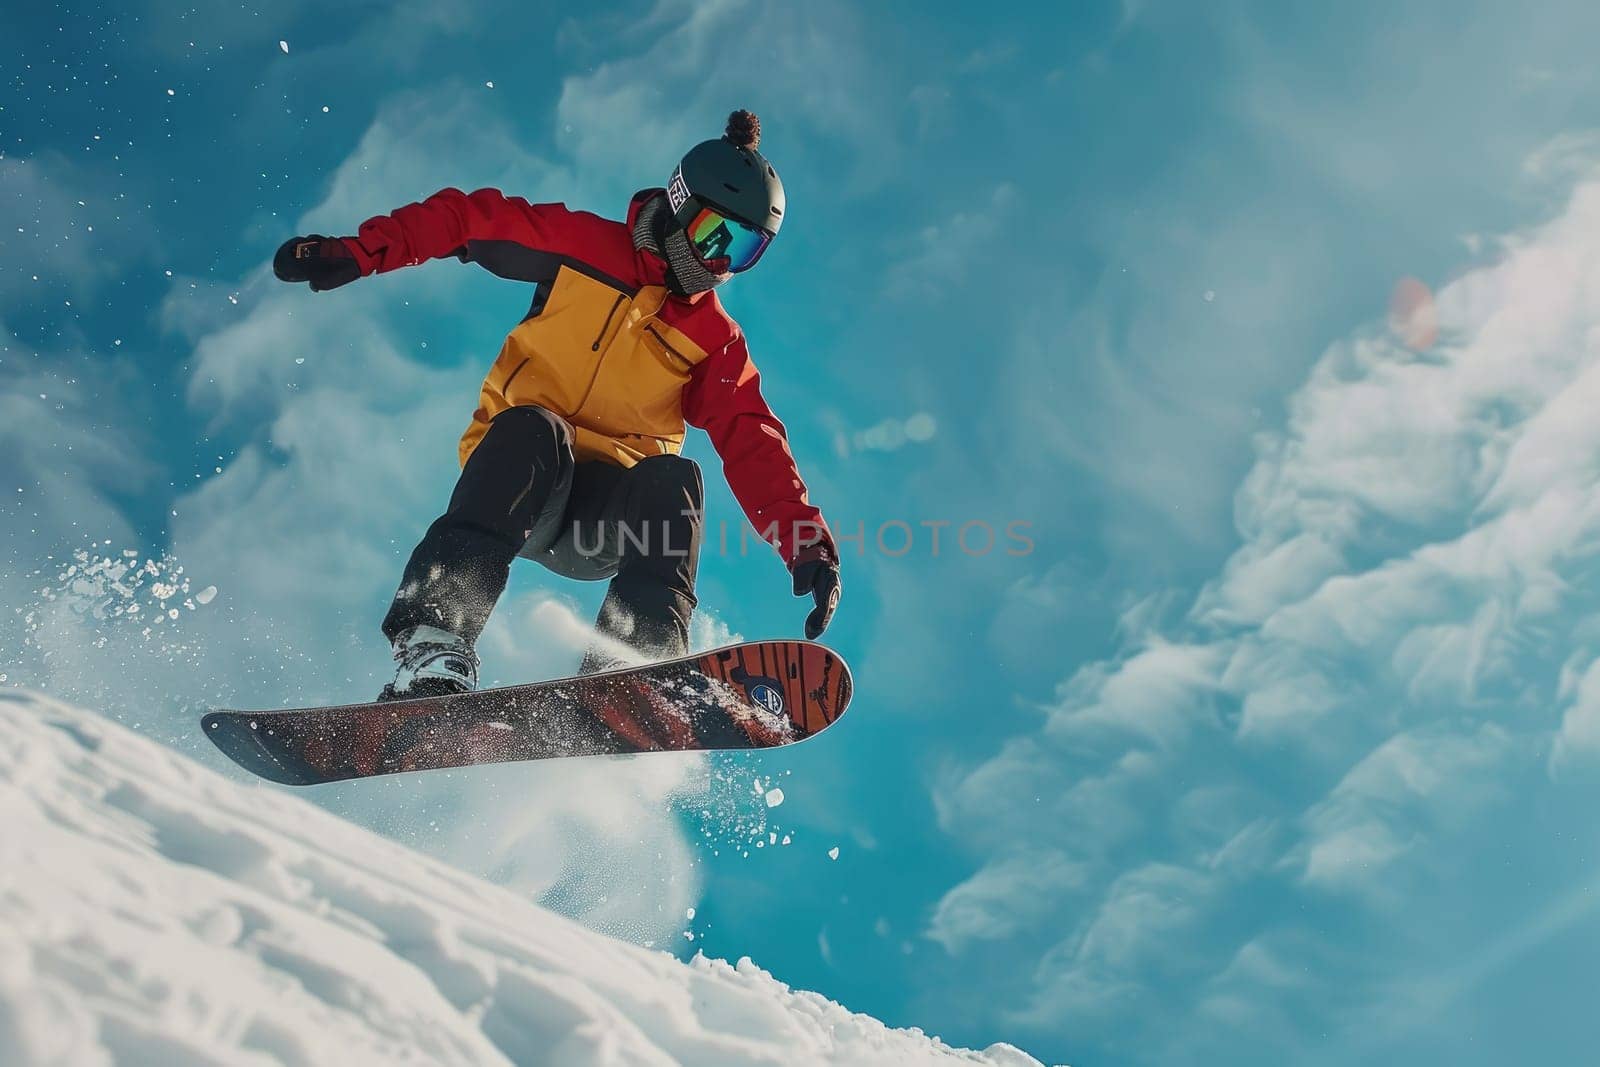 Snowboarding with a stock photo of a snowboarder executing a jump in a terrain park